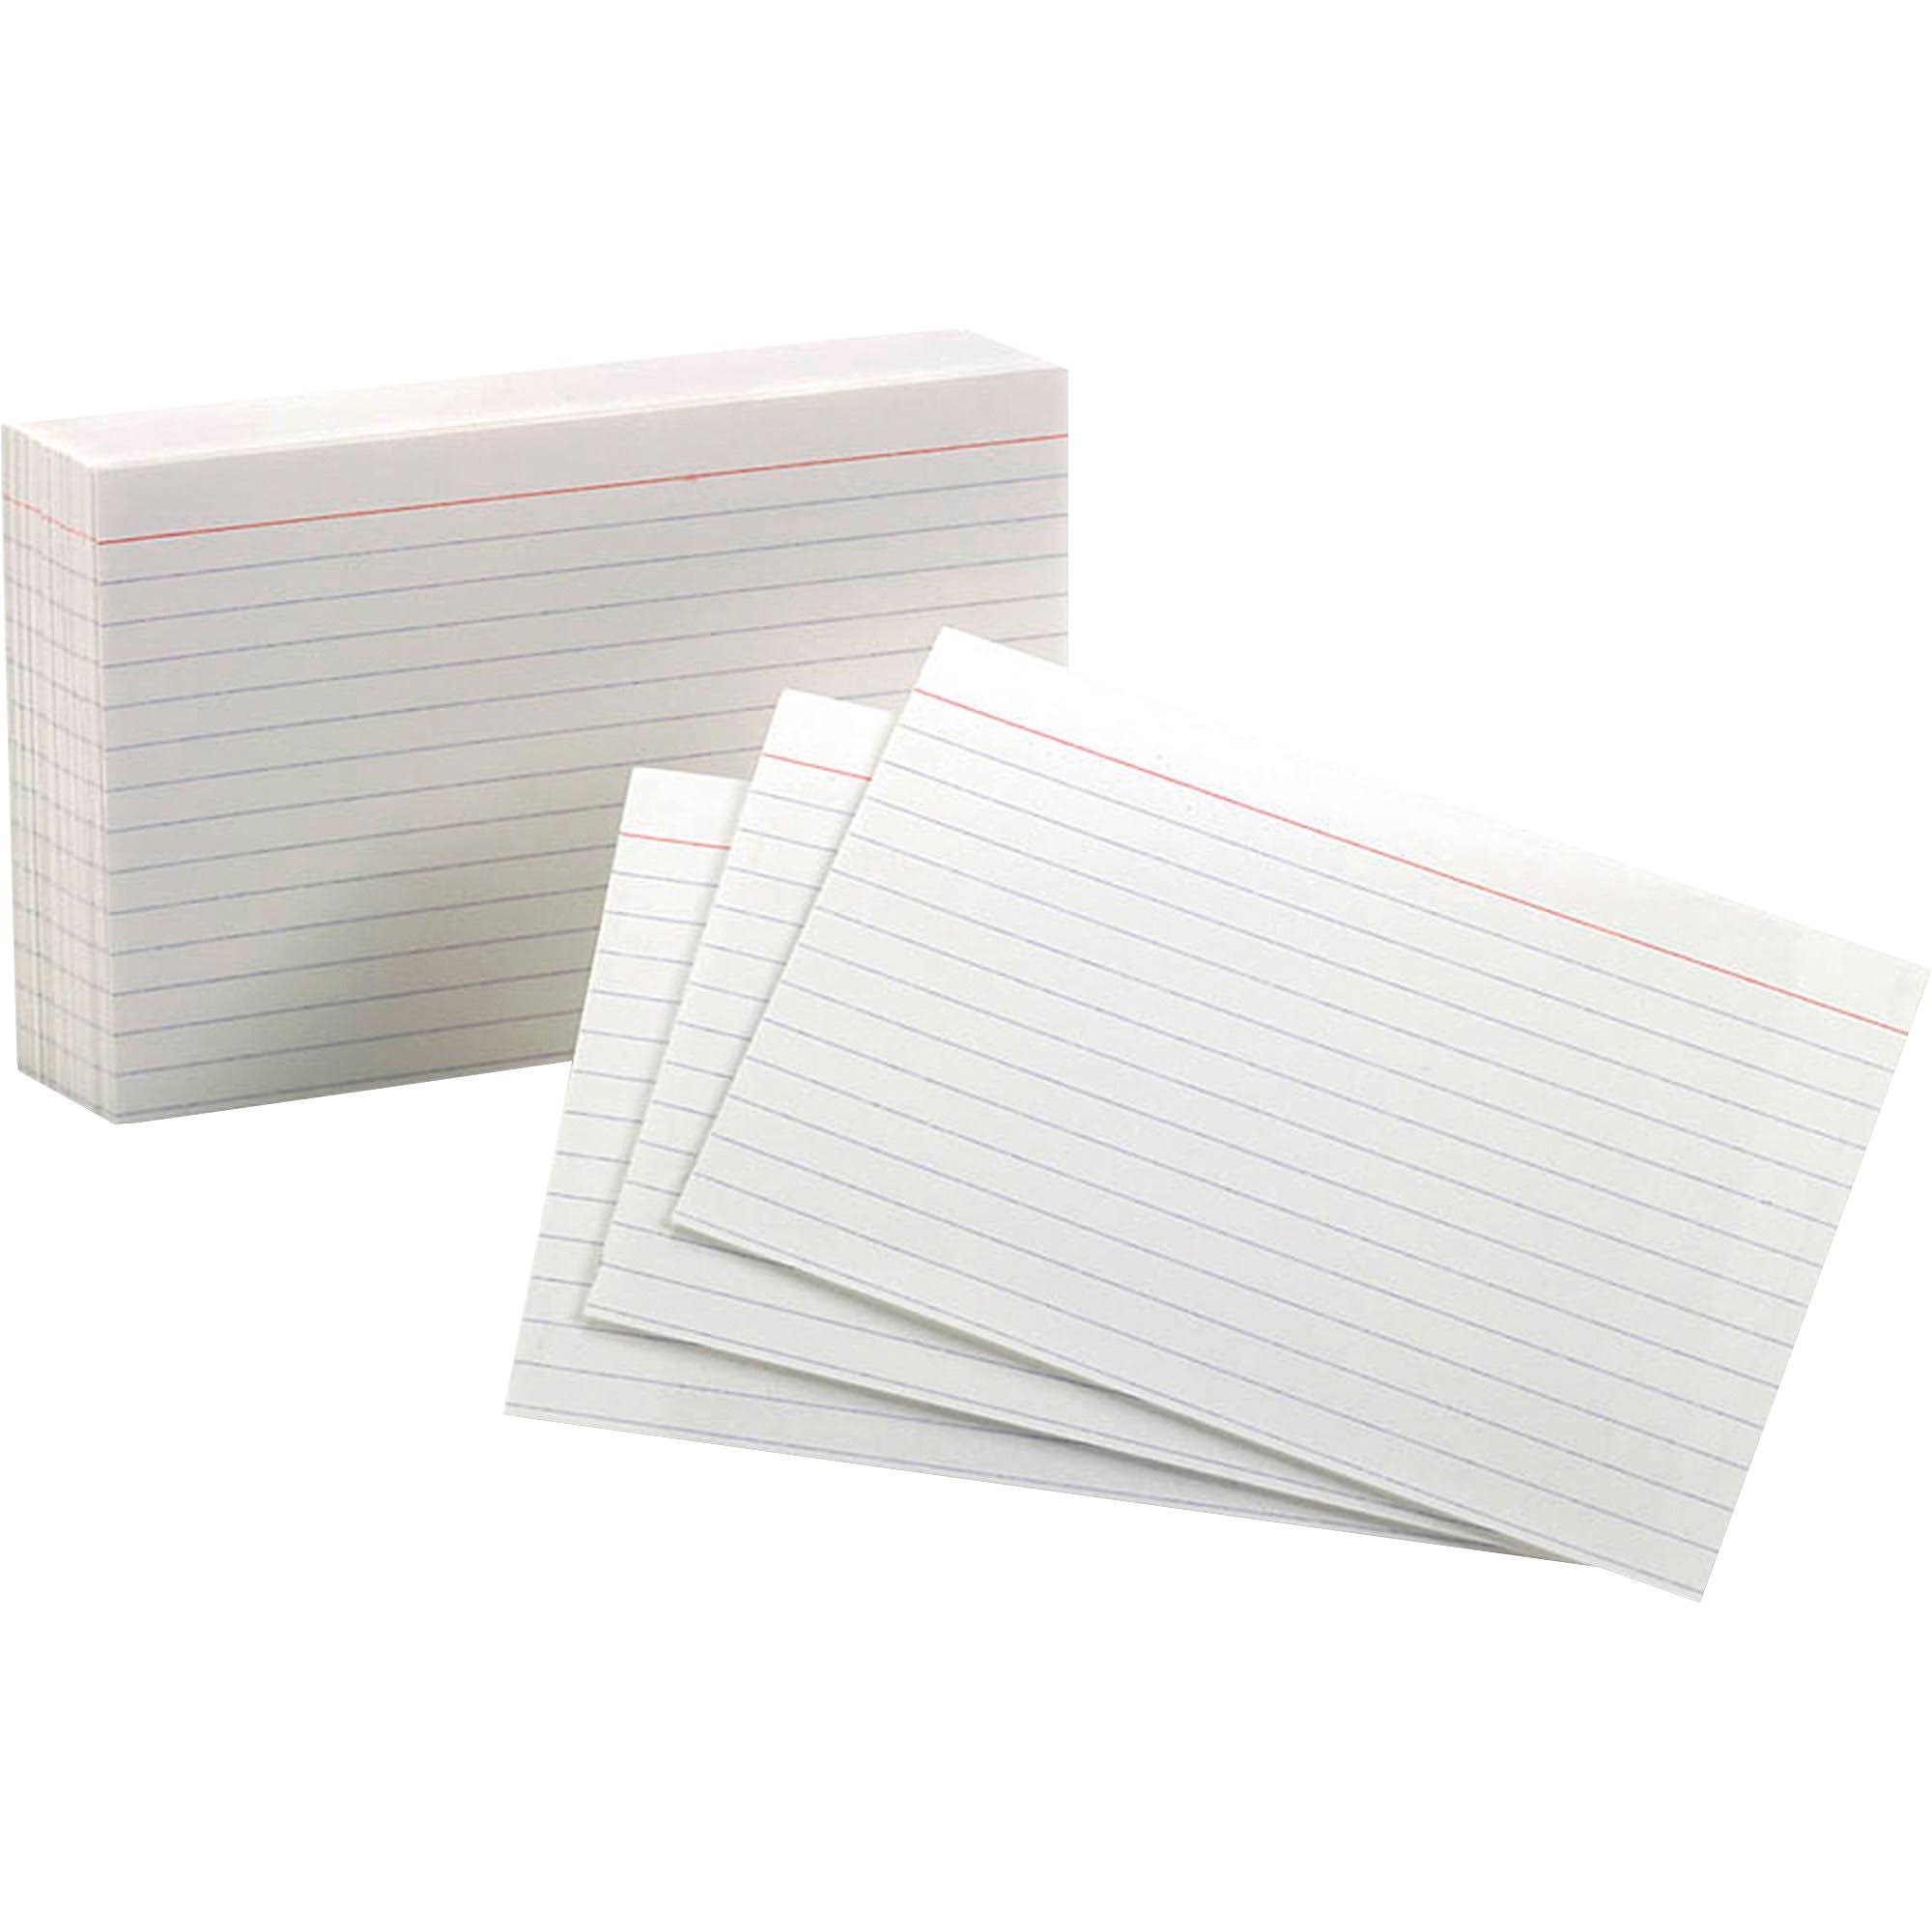 Oxford Ruled Index Cards - White, 4" x 6", 100pk